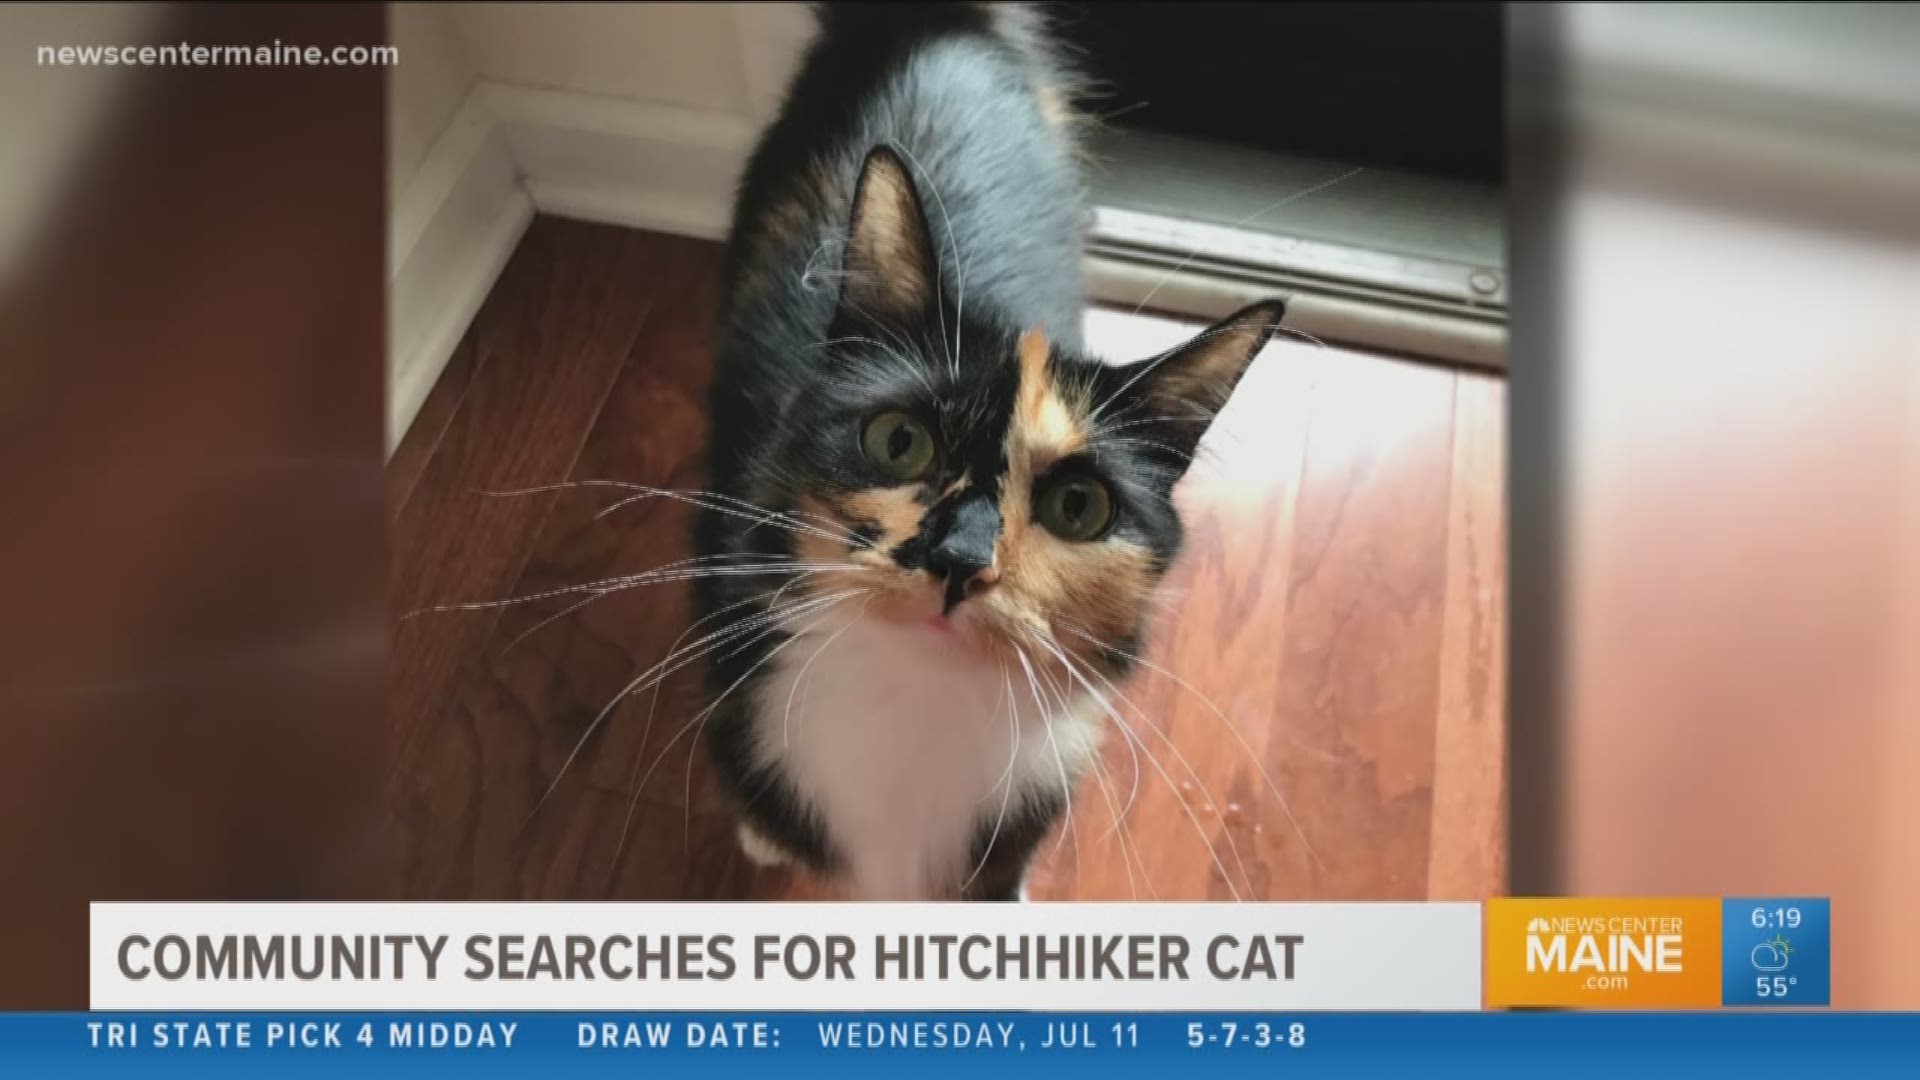 Search is on for hitchhiking cat